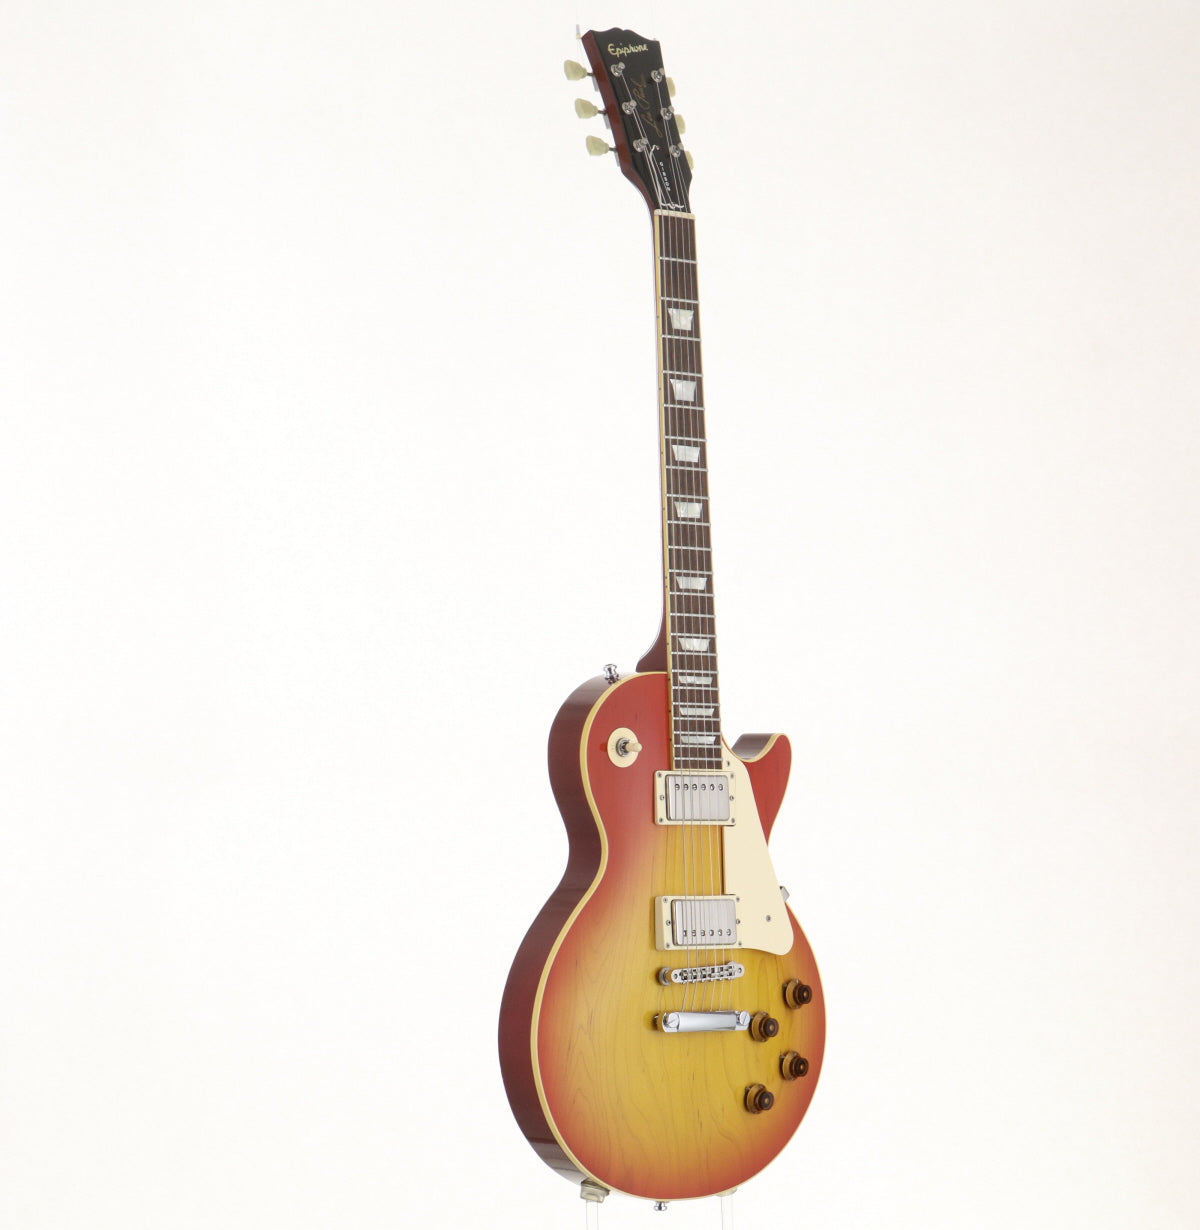 [SN F501036] USED Epiphone / Limited Edition Les Paul Standard LQ HS 2005 [09]